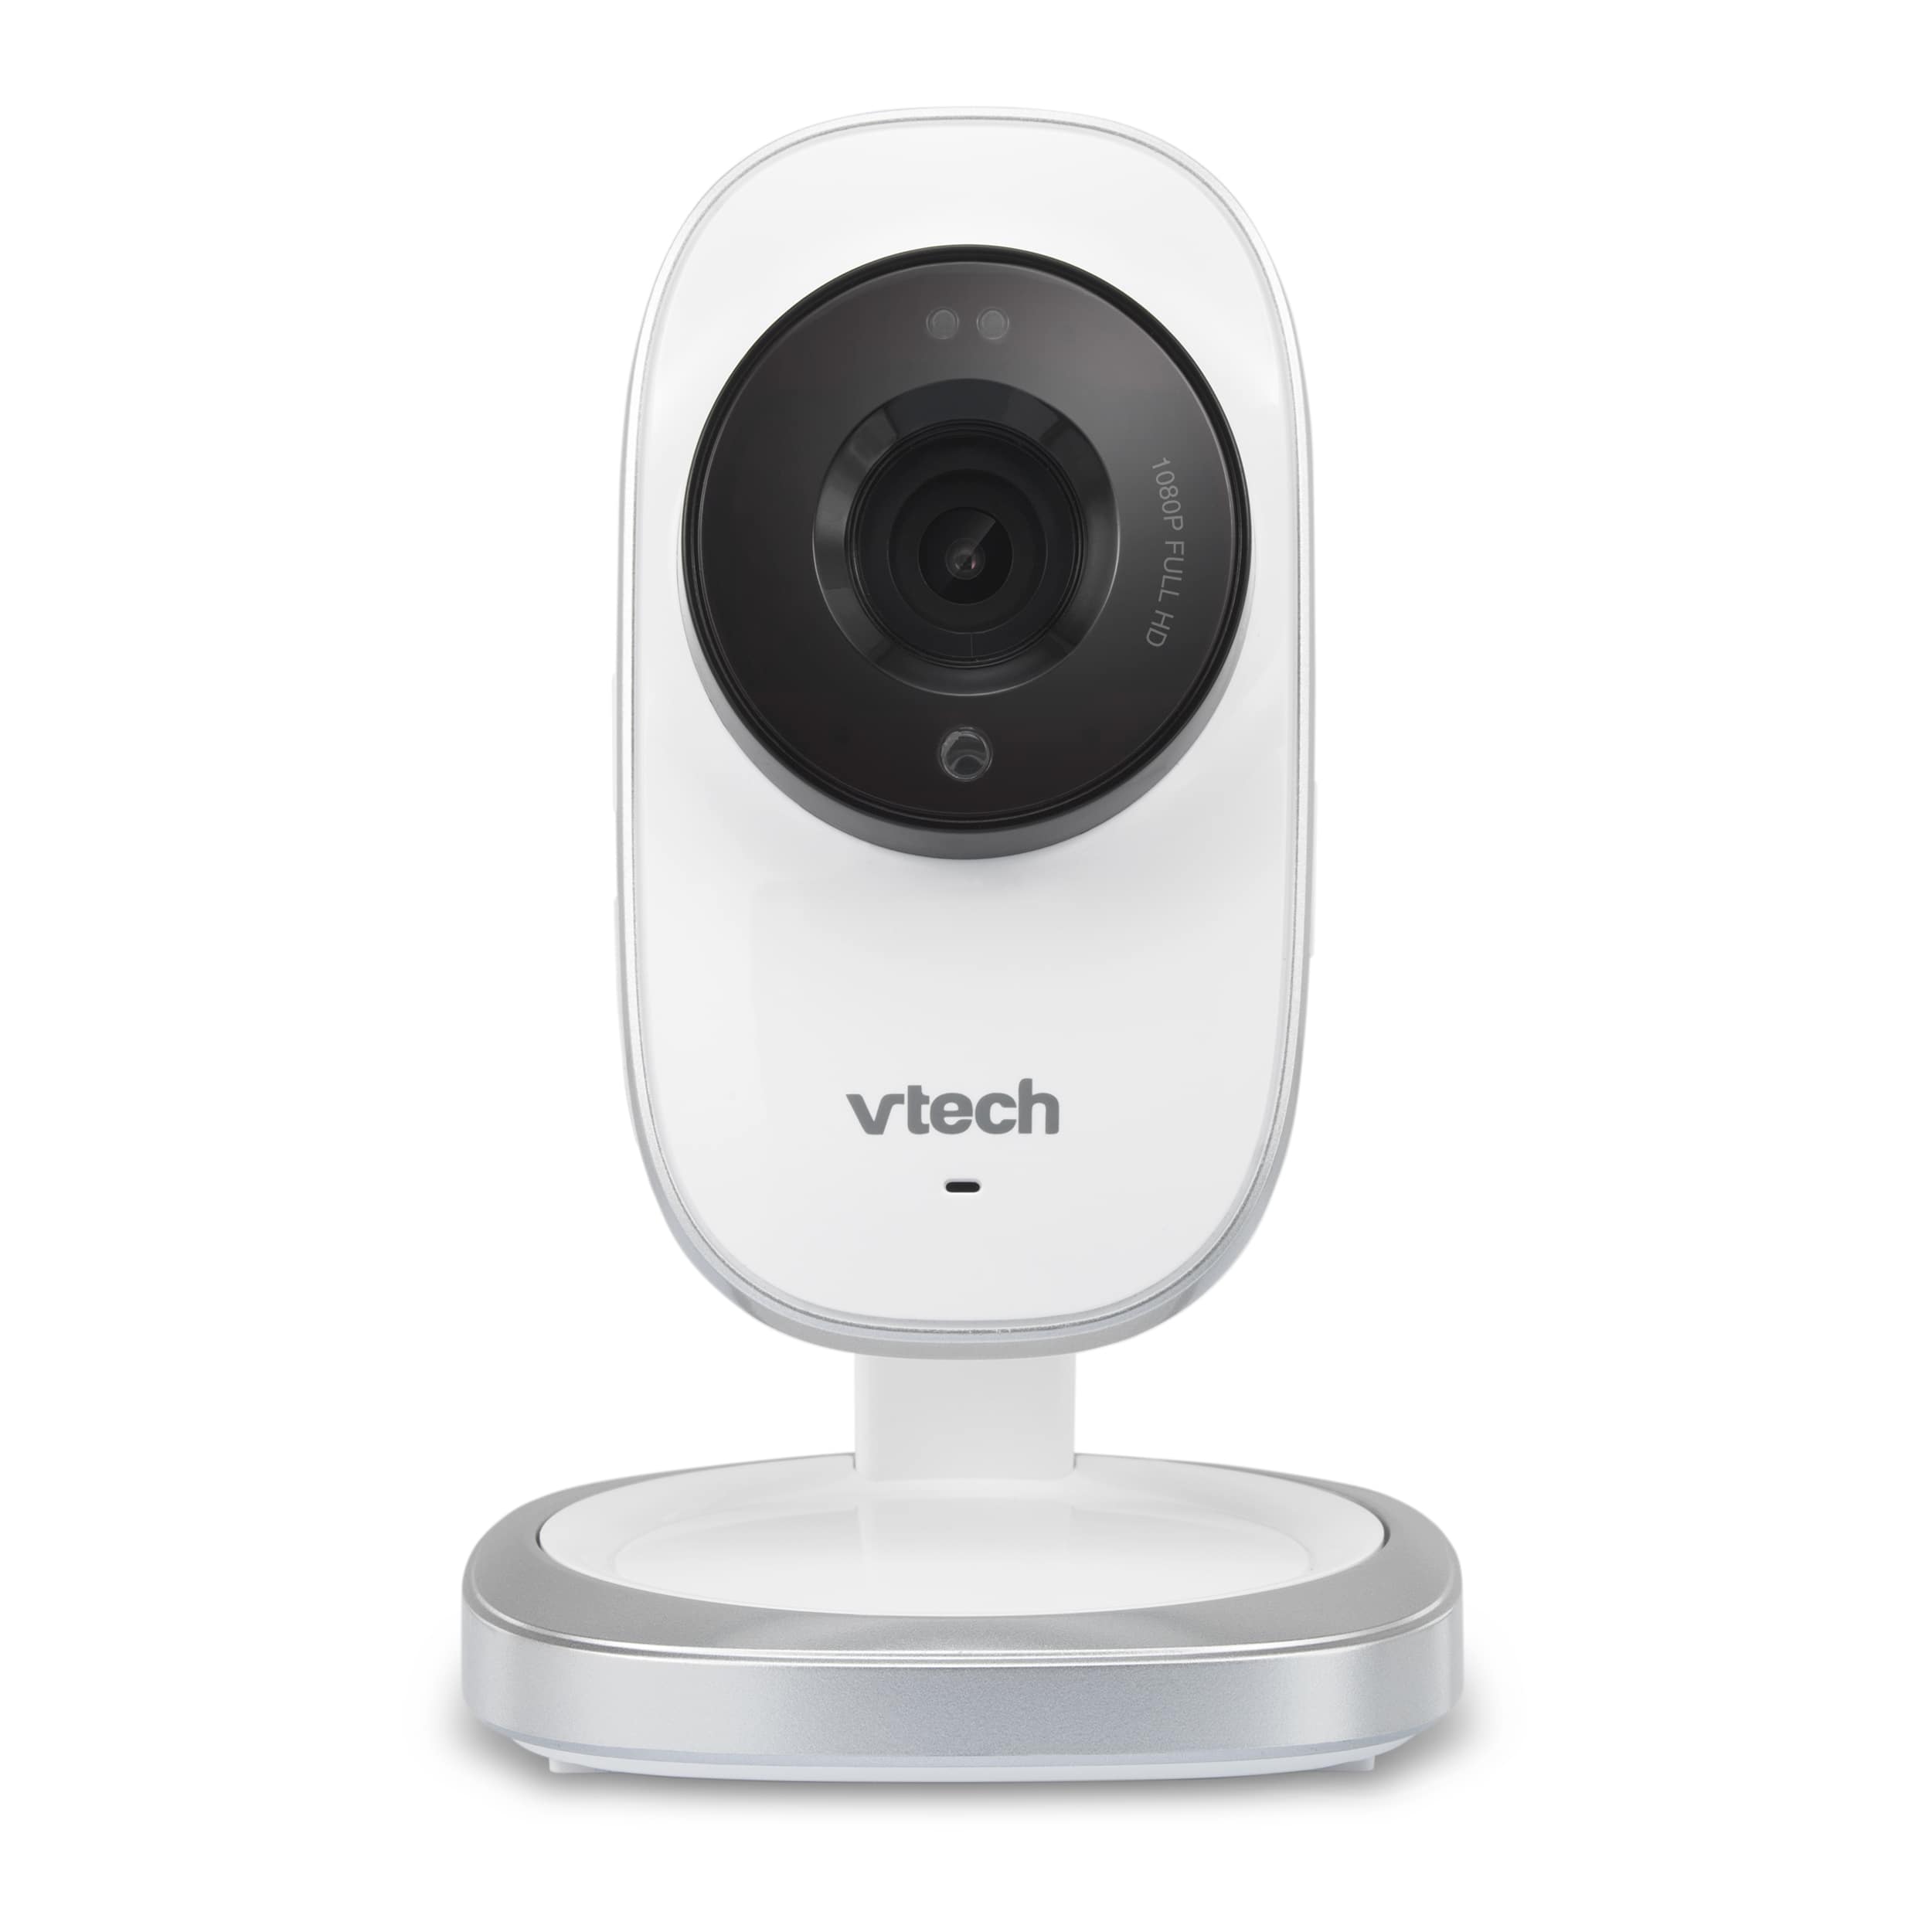 Wi-Fi IP Camera with 1080p Full HD, Free Live Streaming, Free motion detected recording, Automatic Infrared Night Vision and Remote Security Alarm